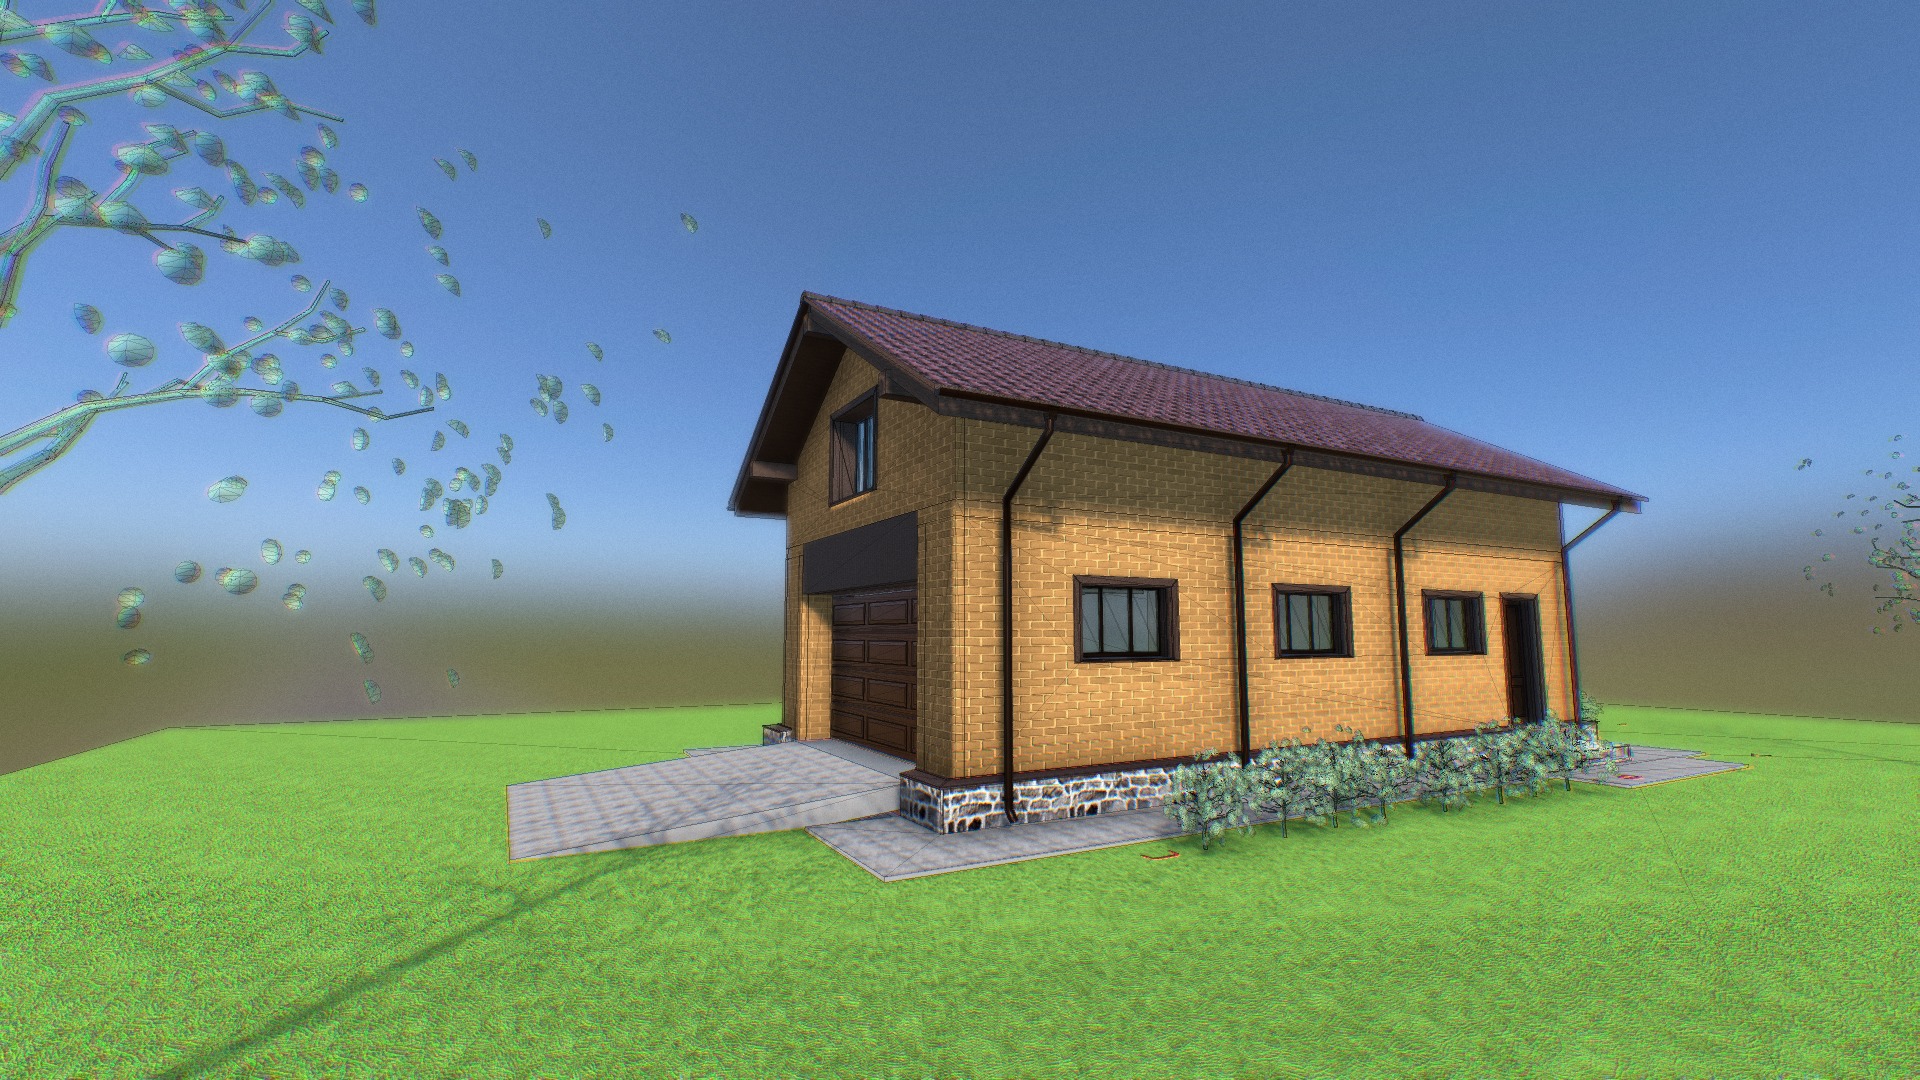 3D model Garage 08 17 - This is a 3D model of the Garage 08 17. The 3D model is about a house in a grassy field.